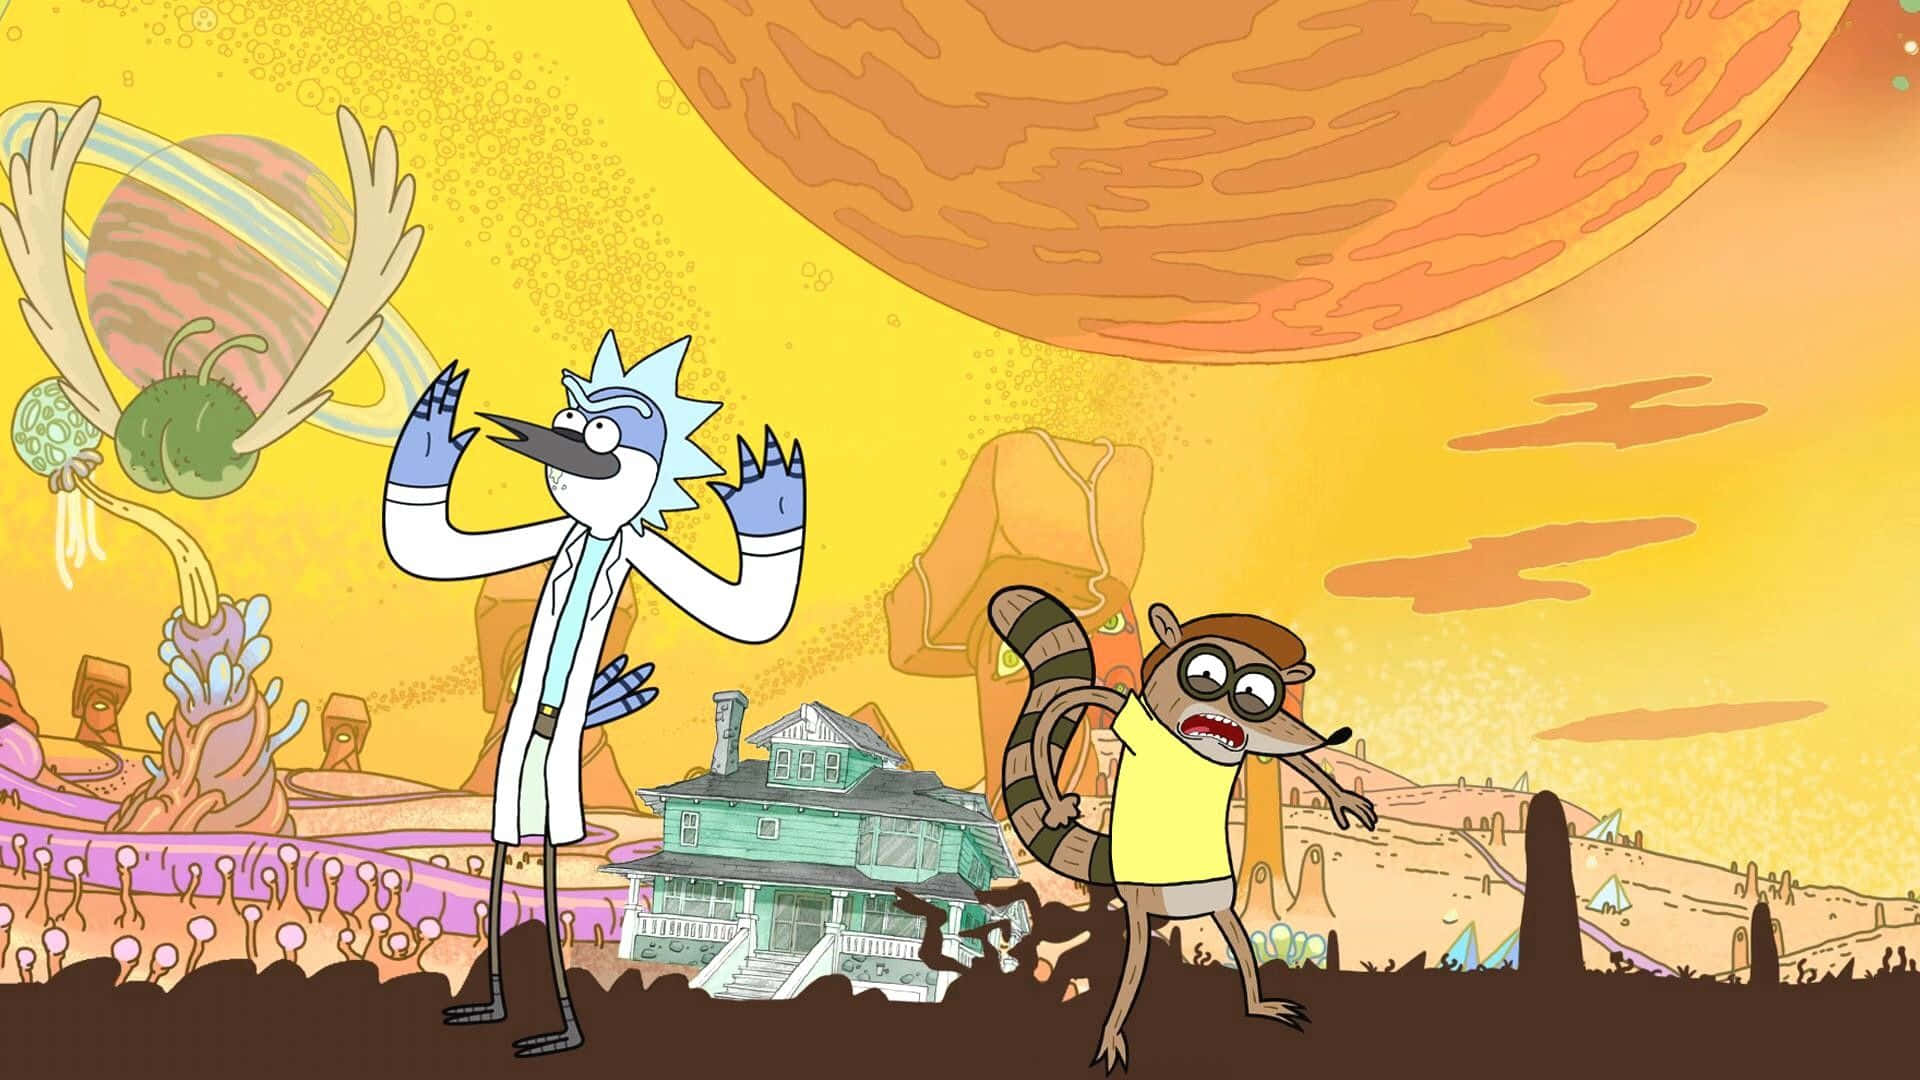 Mordecai, Rigby, and friends in their vibrant, animated world.